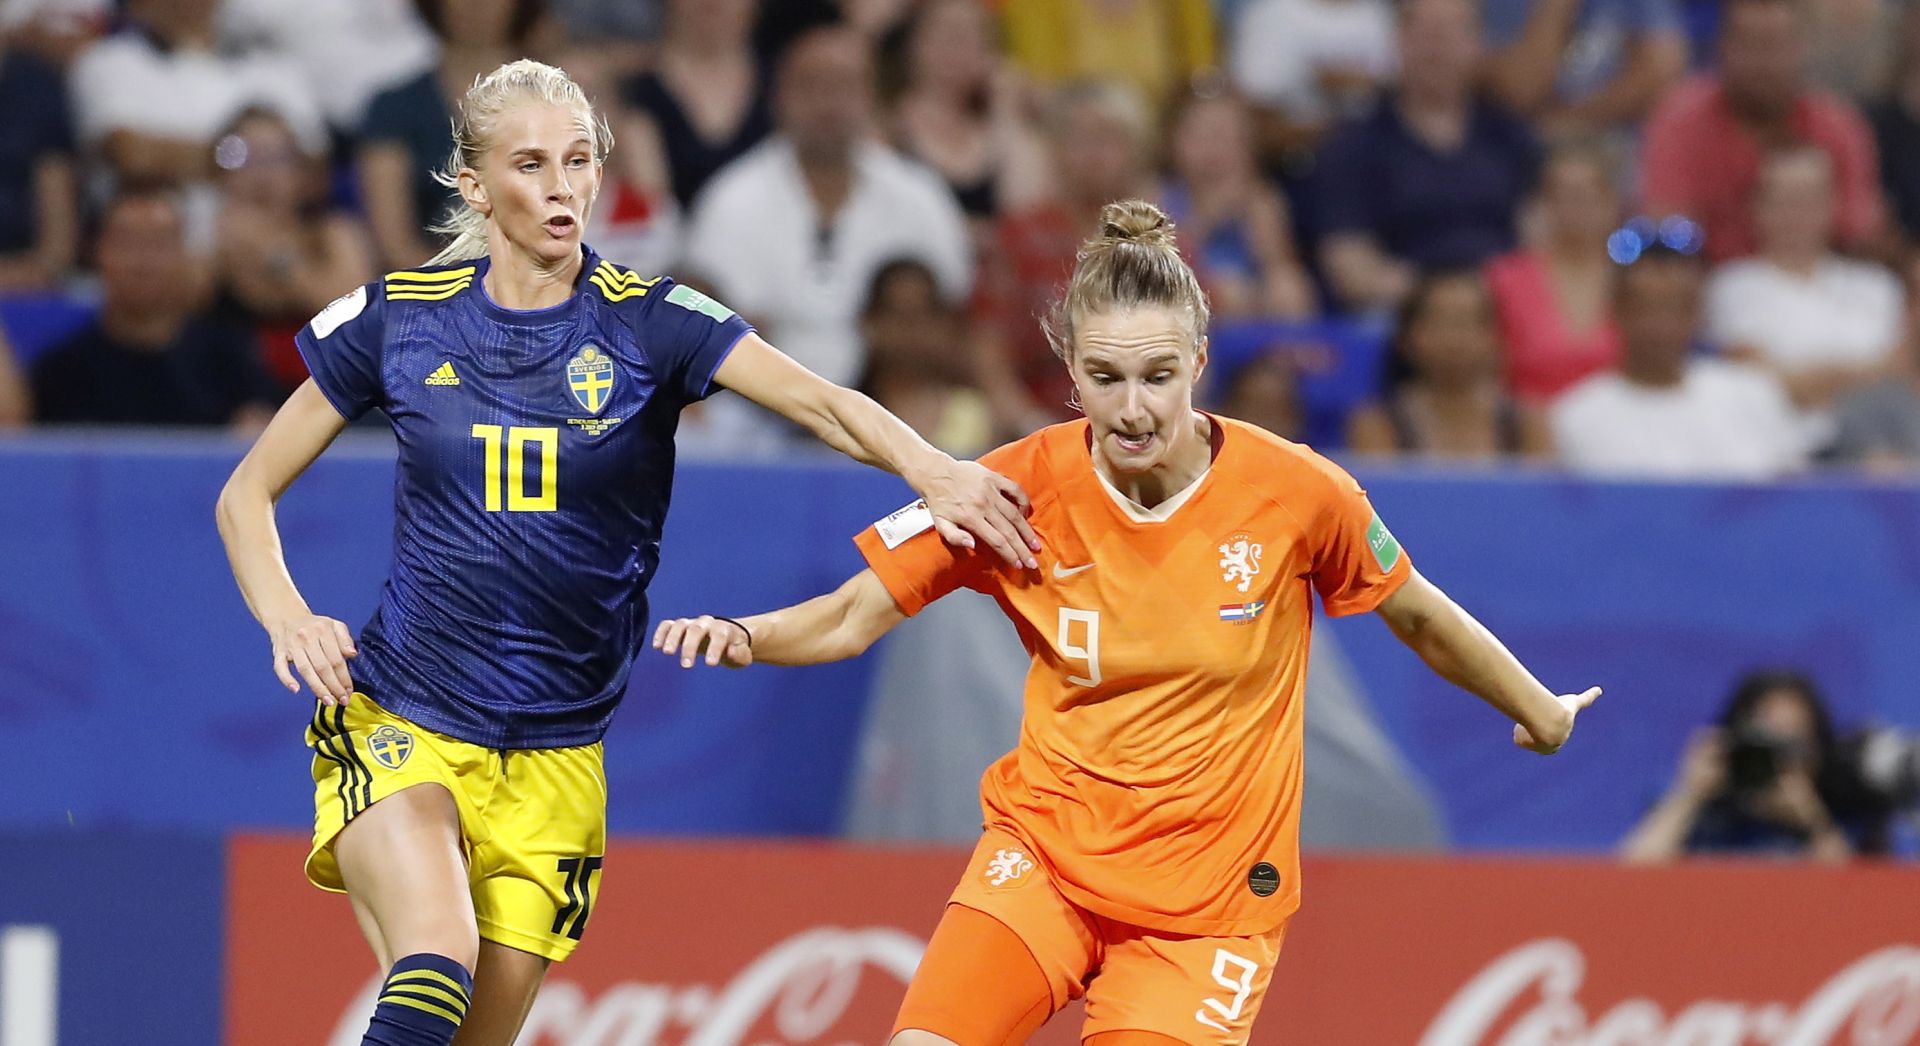 epa07693111 Netherland's Vivianne Miedema (R) in action against Sweden's Sofia Jakobsson (L) during the FIFA Women's World Cup 2019 semifinal soccer match between Netherlands and Sweden in Lyon, France, 03 July 2019.  EPA/SEBASTIAN NOGIER